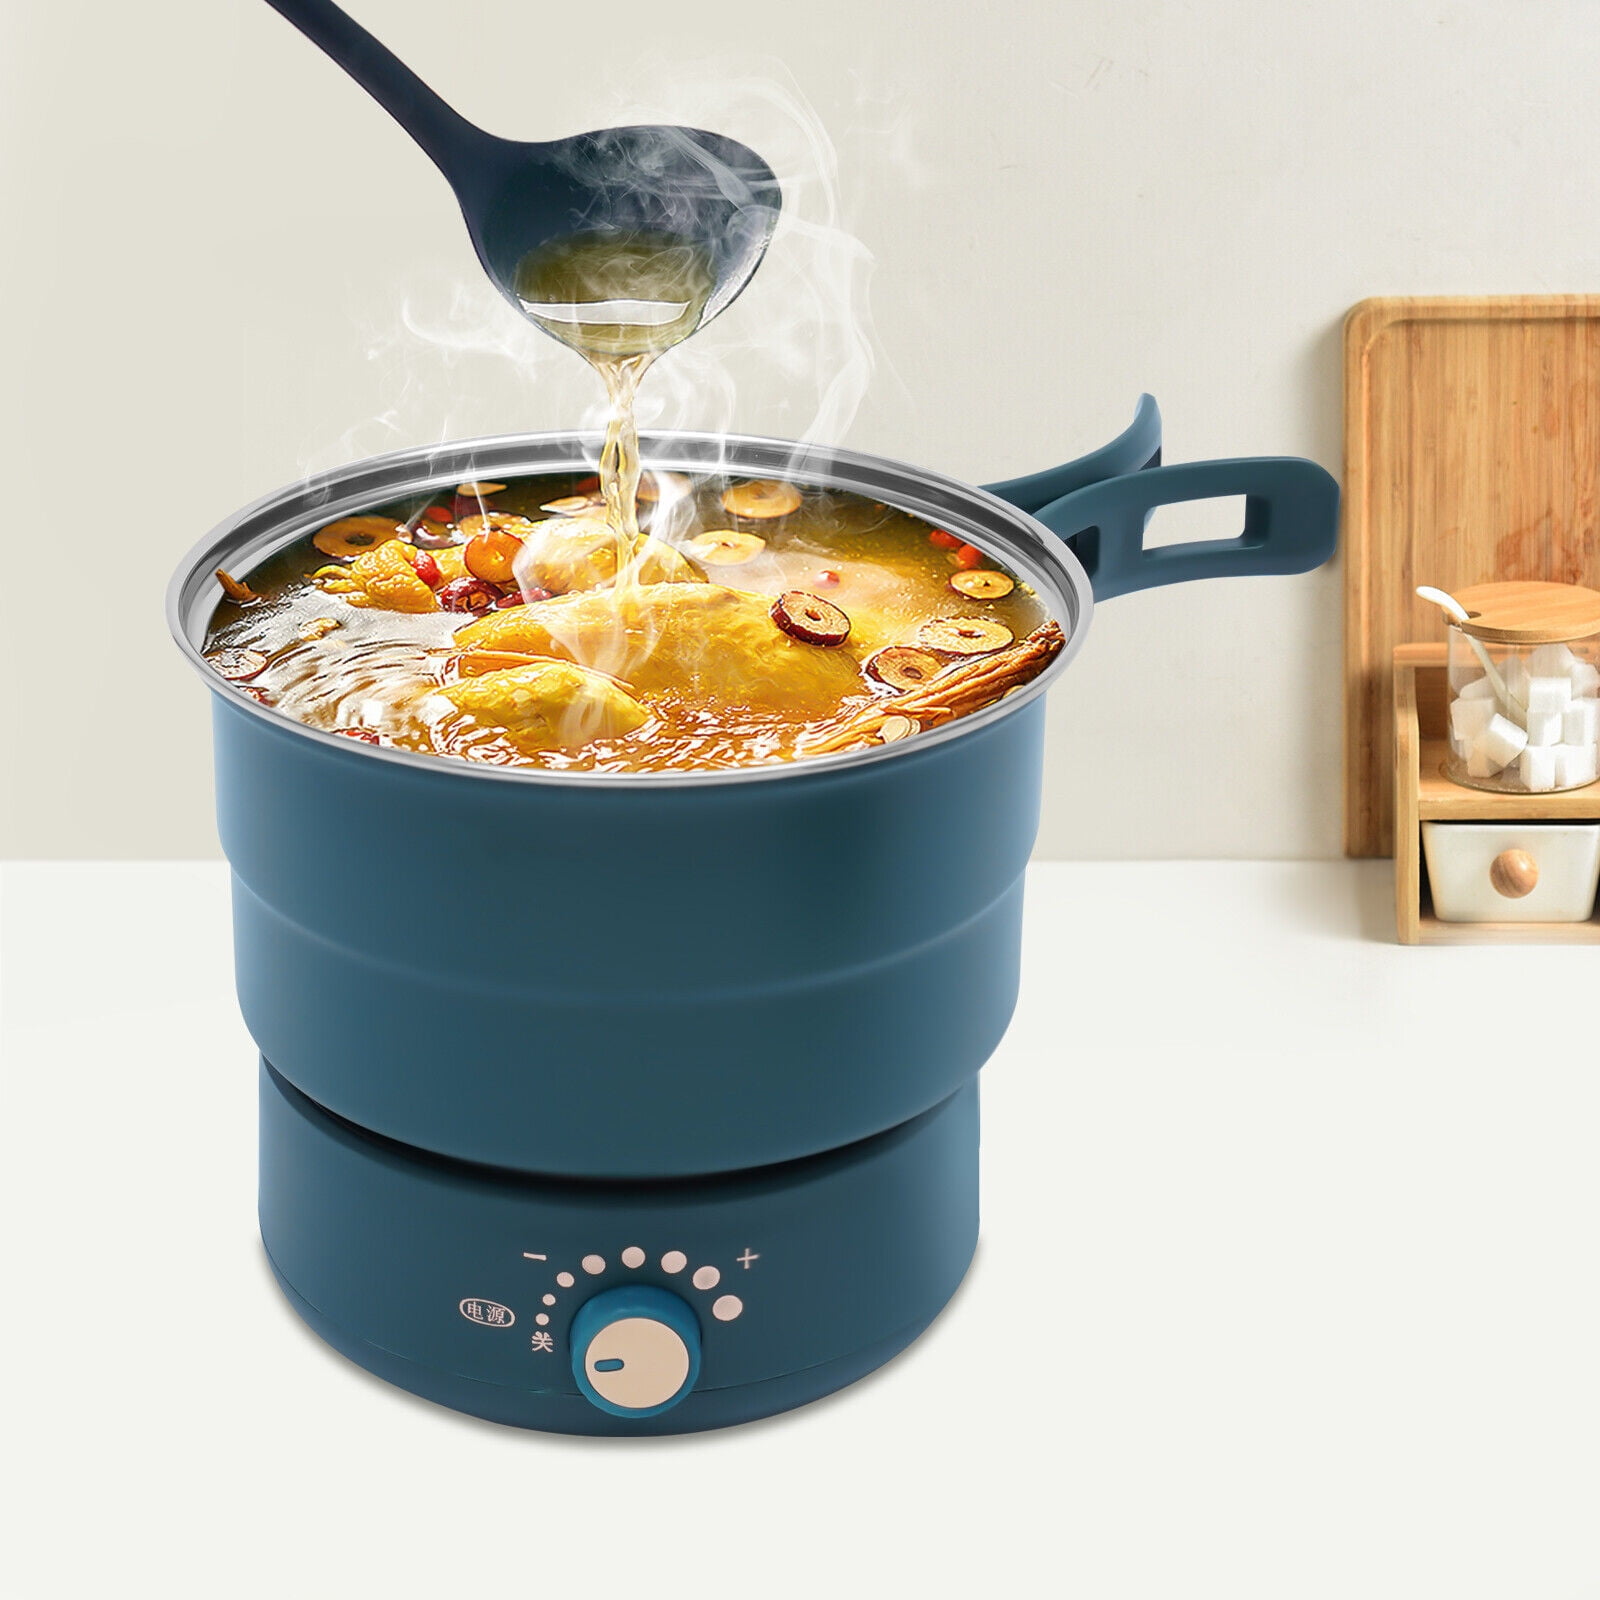 MIDUO 3-in-1 Smart Lifting Electric Hot Pot with Steaming Basket Low Sugar  Rice Cooker for Home